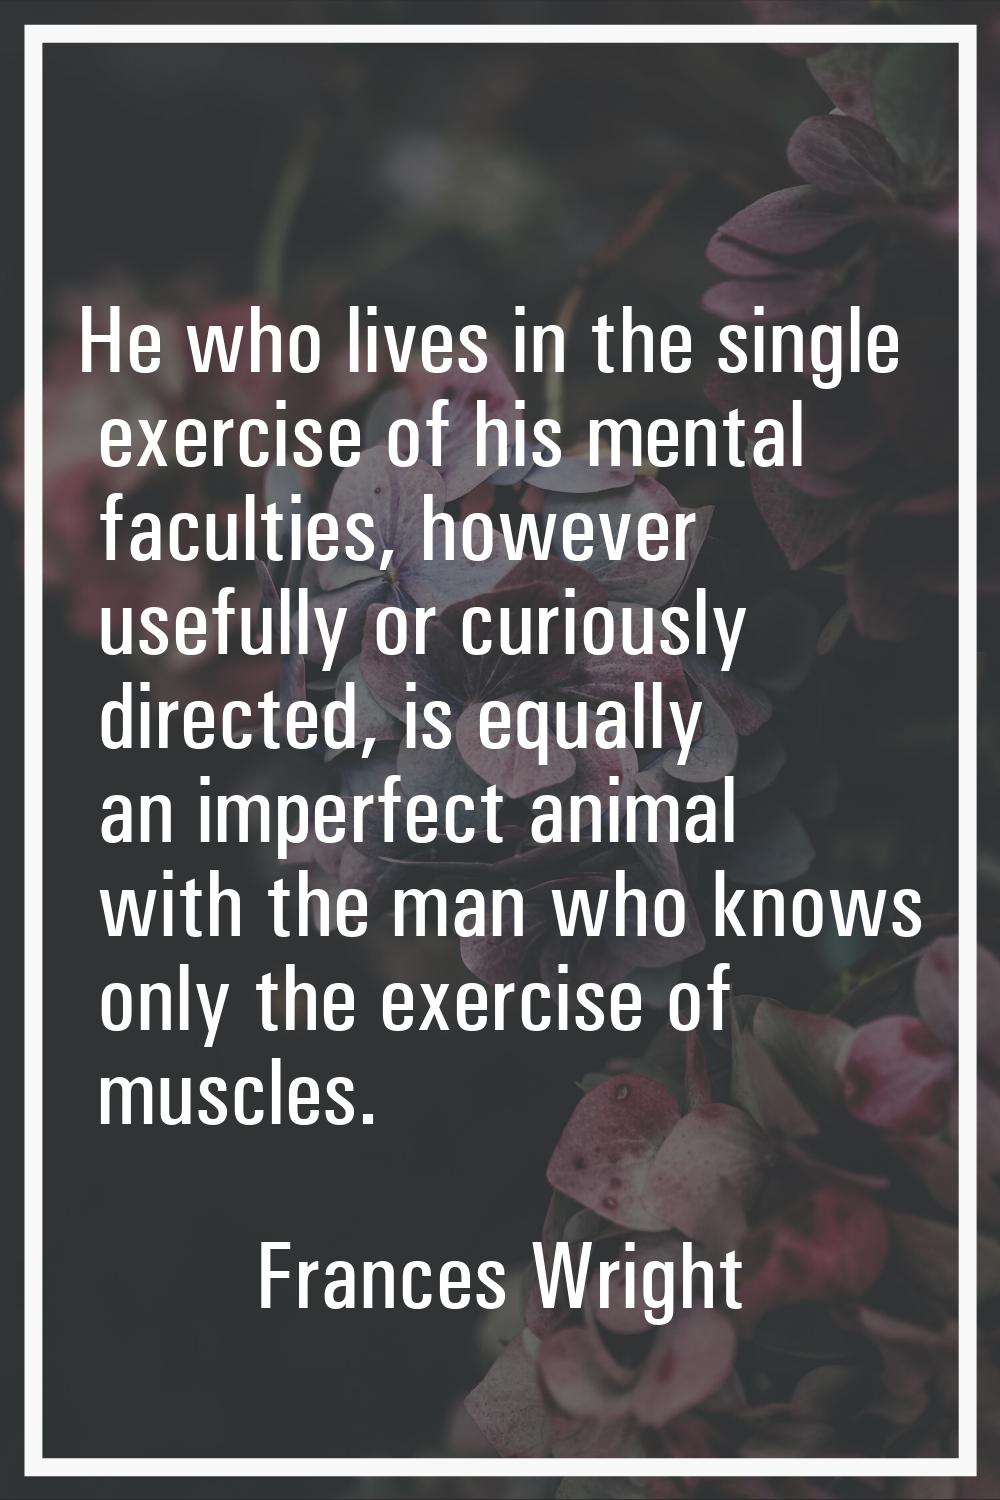 He who lives in the single exercise of his mental faculties, however usefully or curiously directed